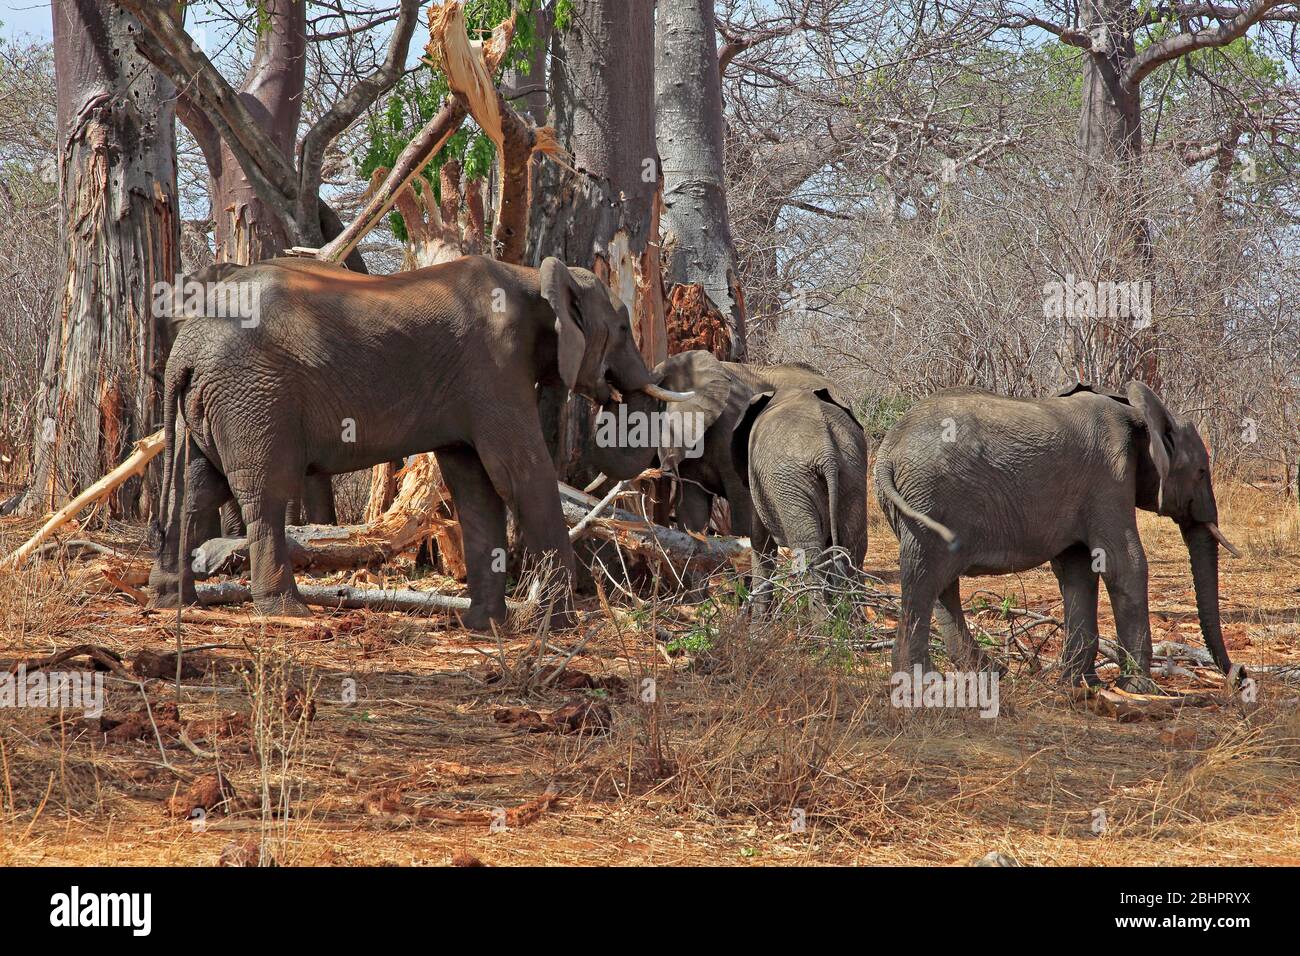 Family of elephants stripping and eating a tree Stock Photo